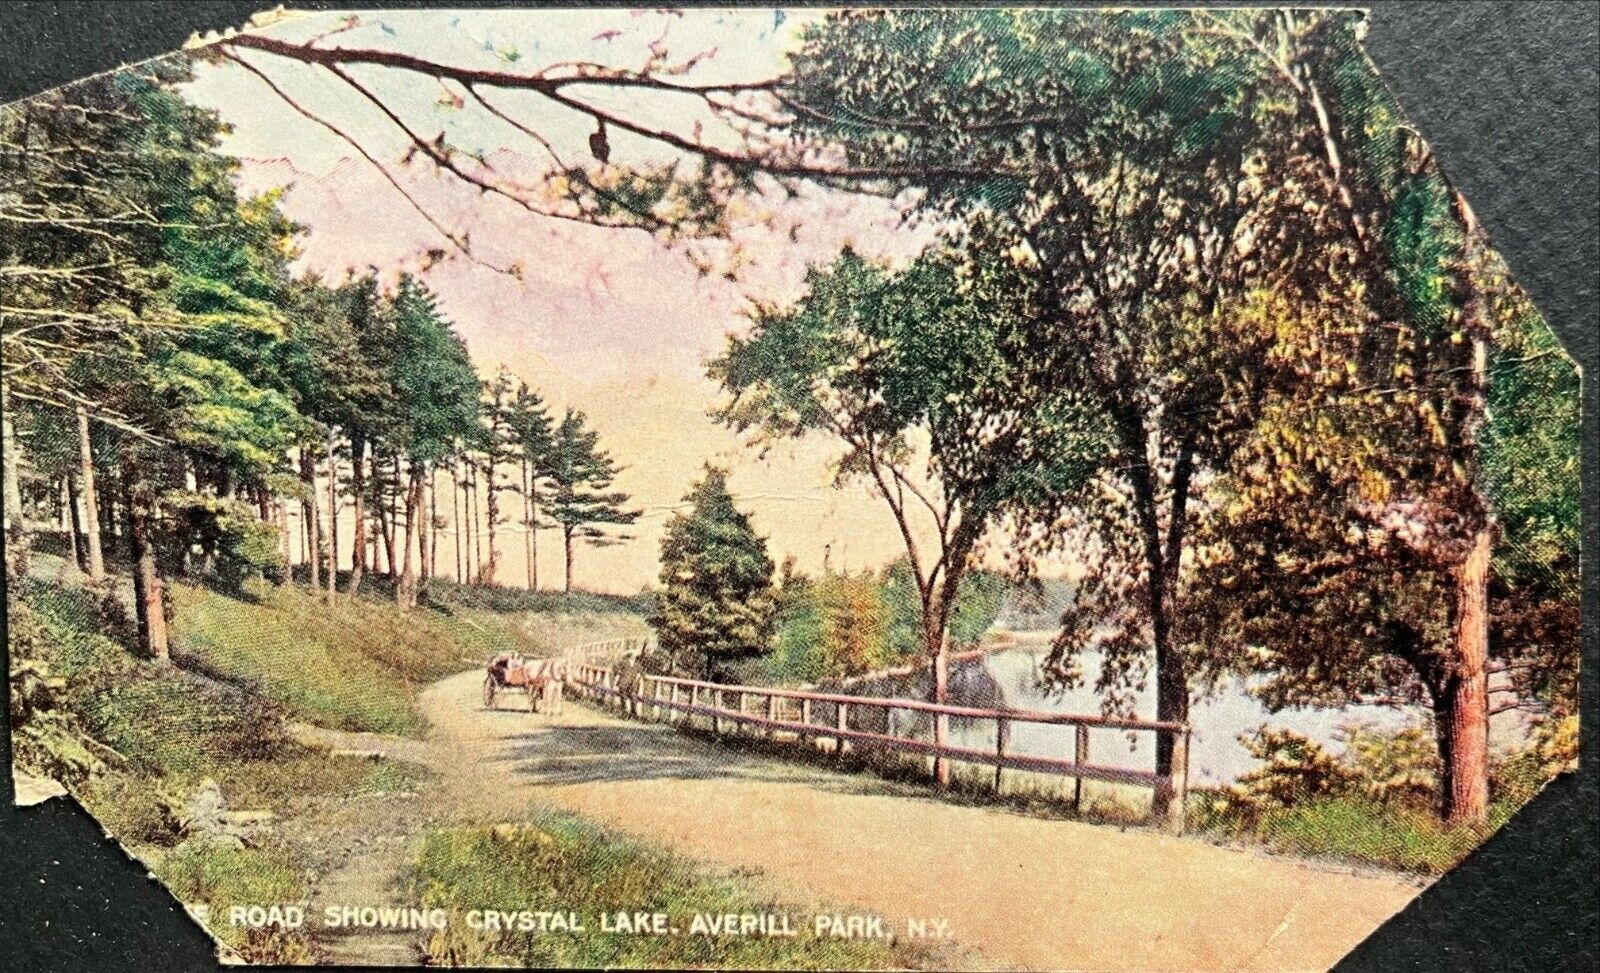 1908 Averill Park, NY PC Road showing Crystal Lake by J.J. Lewis